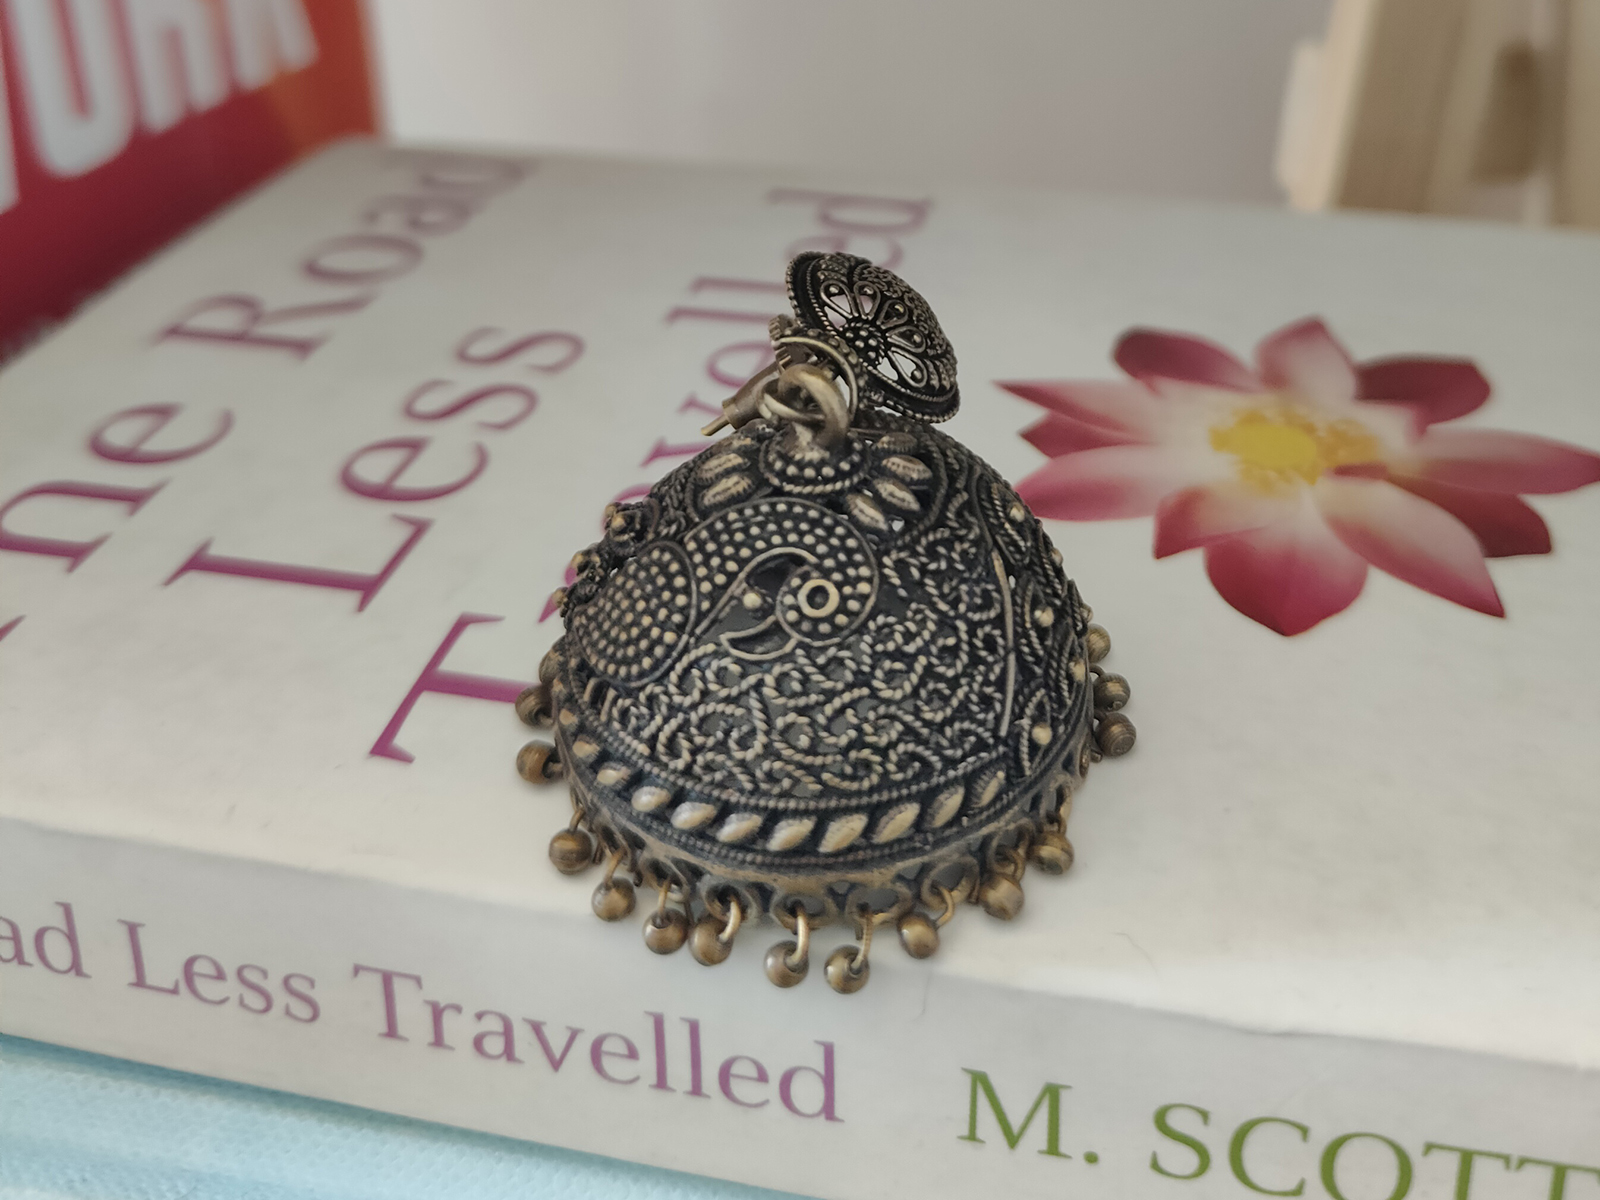 A German silver earring on The Road Less Travelled by psychologist M. Scott Peck photographed with the Realme GT 2 Pro's primary